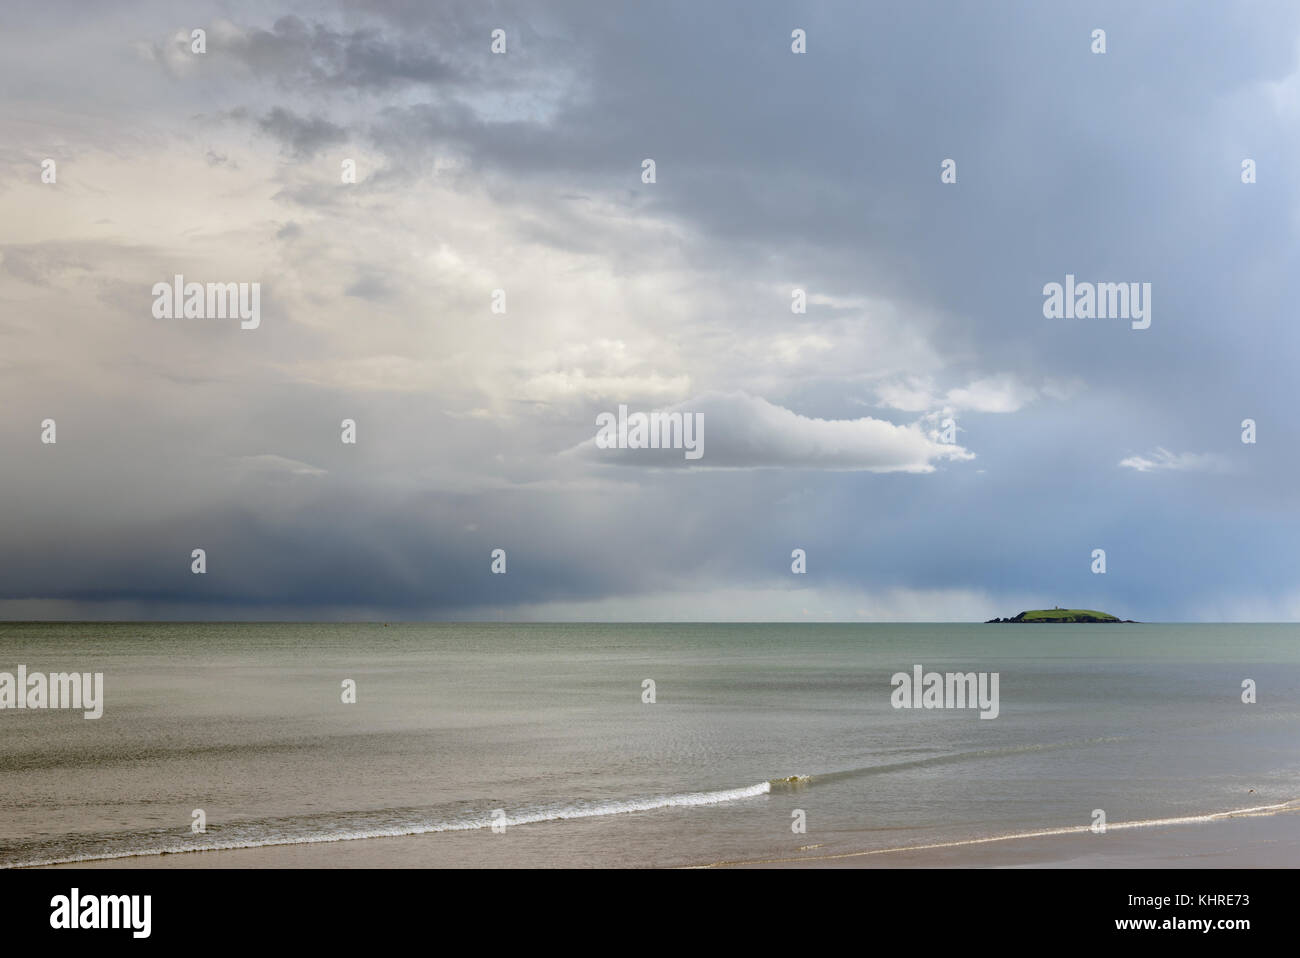 Capel island in Scottish Sea as seen from Youghal beach County Cork in Ireland on a dull day with calm waters and distant stormy skies Stock Photo